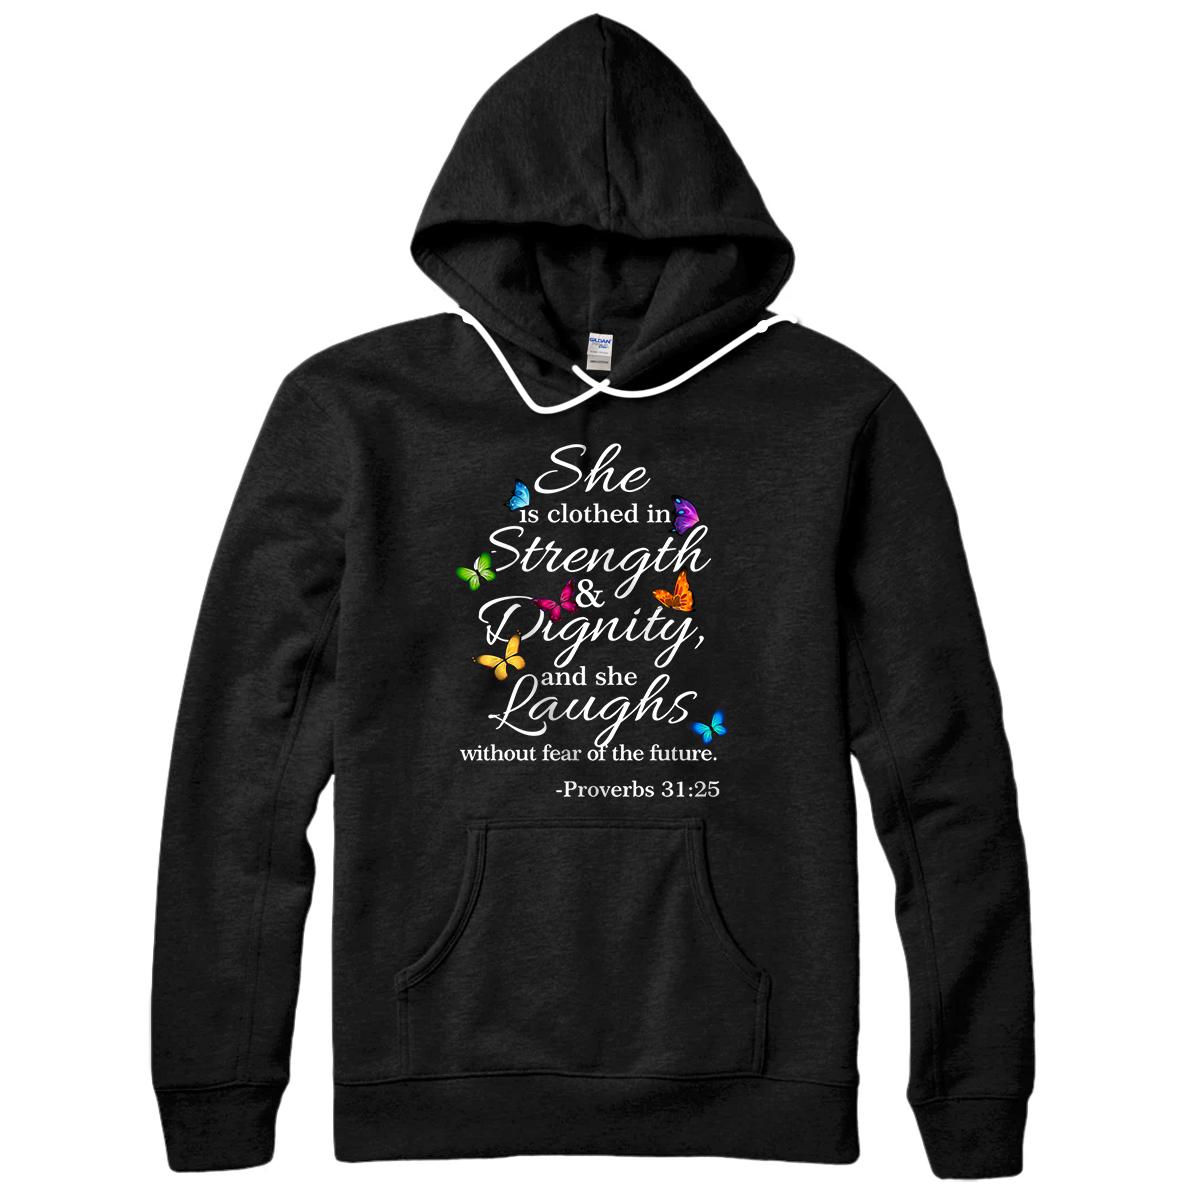 Personalized She is Clothed Strength & Dignity Proverbs 31:25 Pullover Hoodie